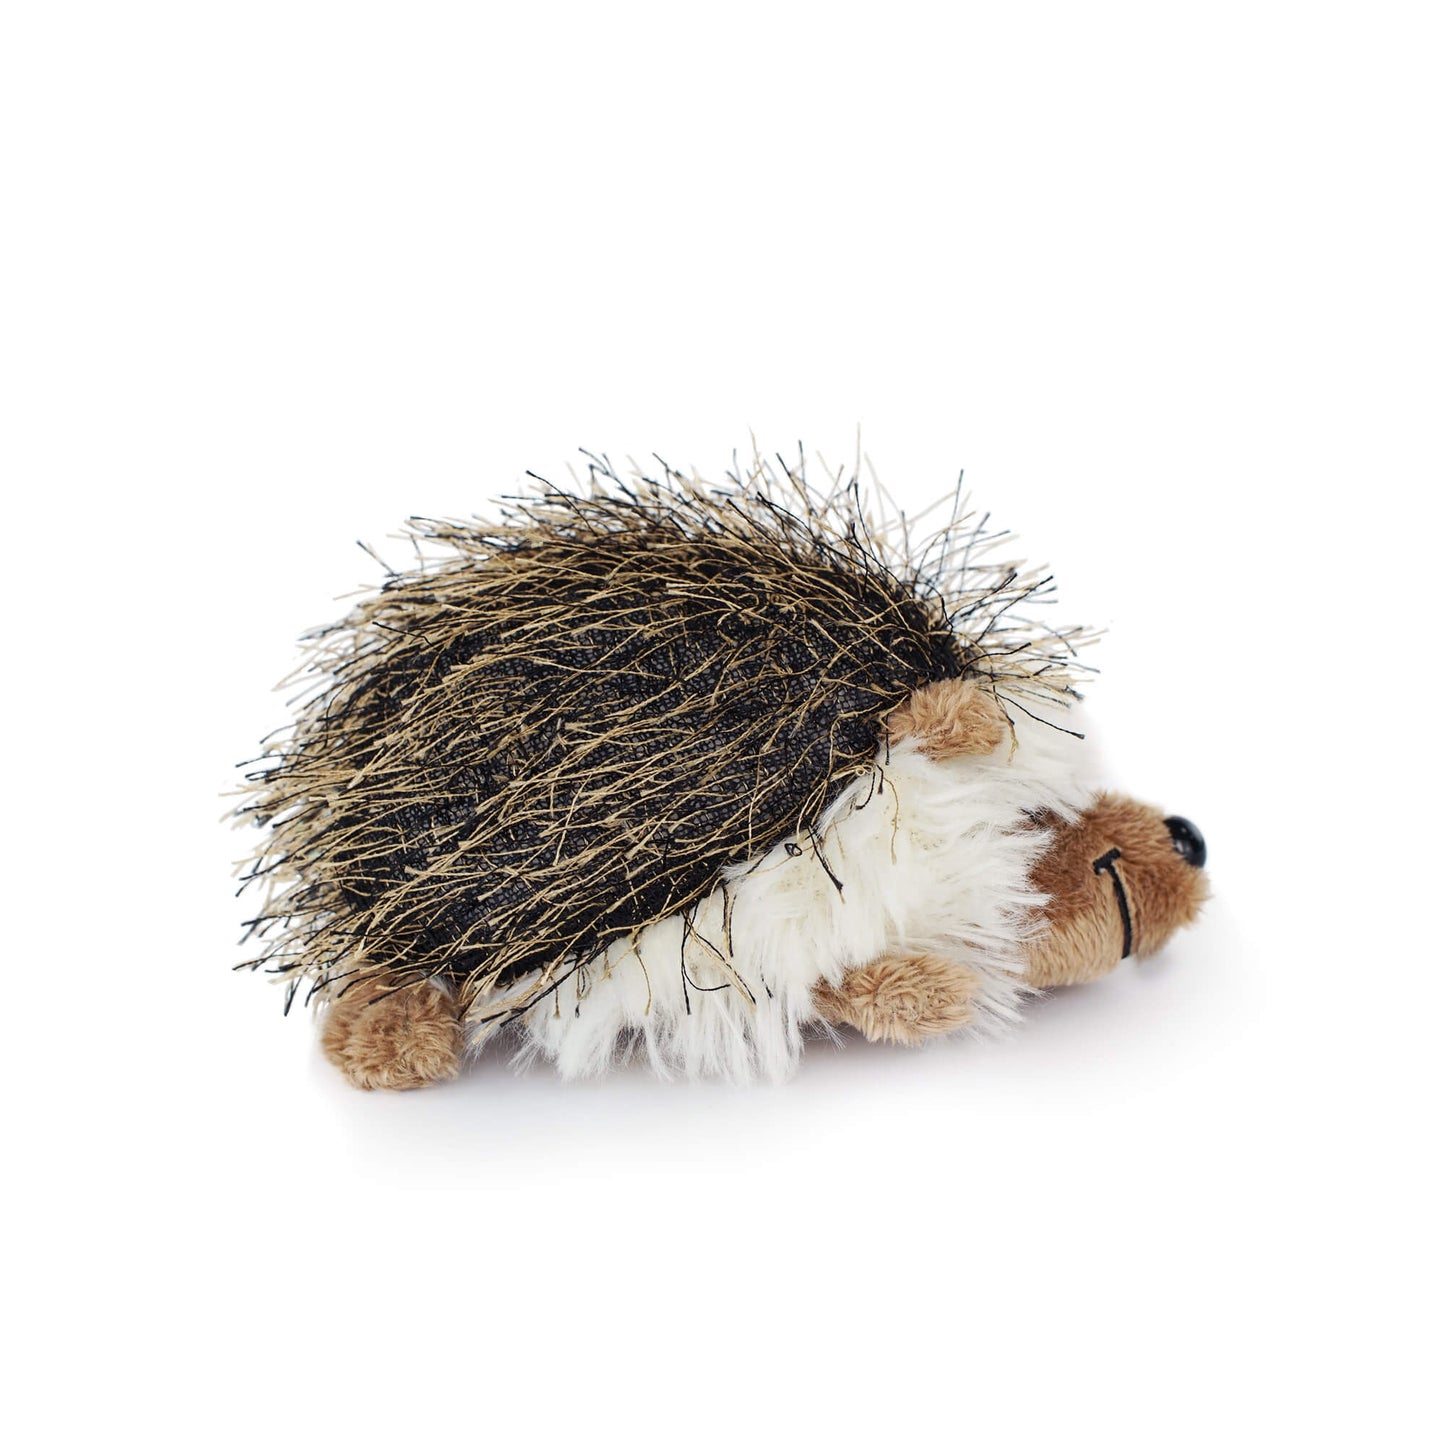 Side view close up how spines of hedgehog look like PlushThis